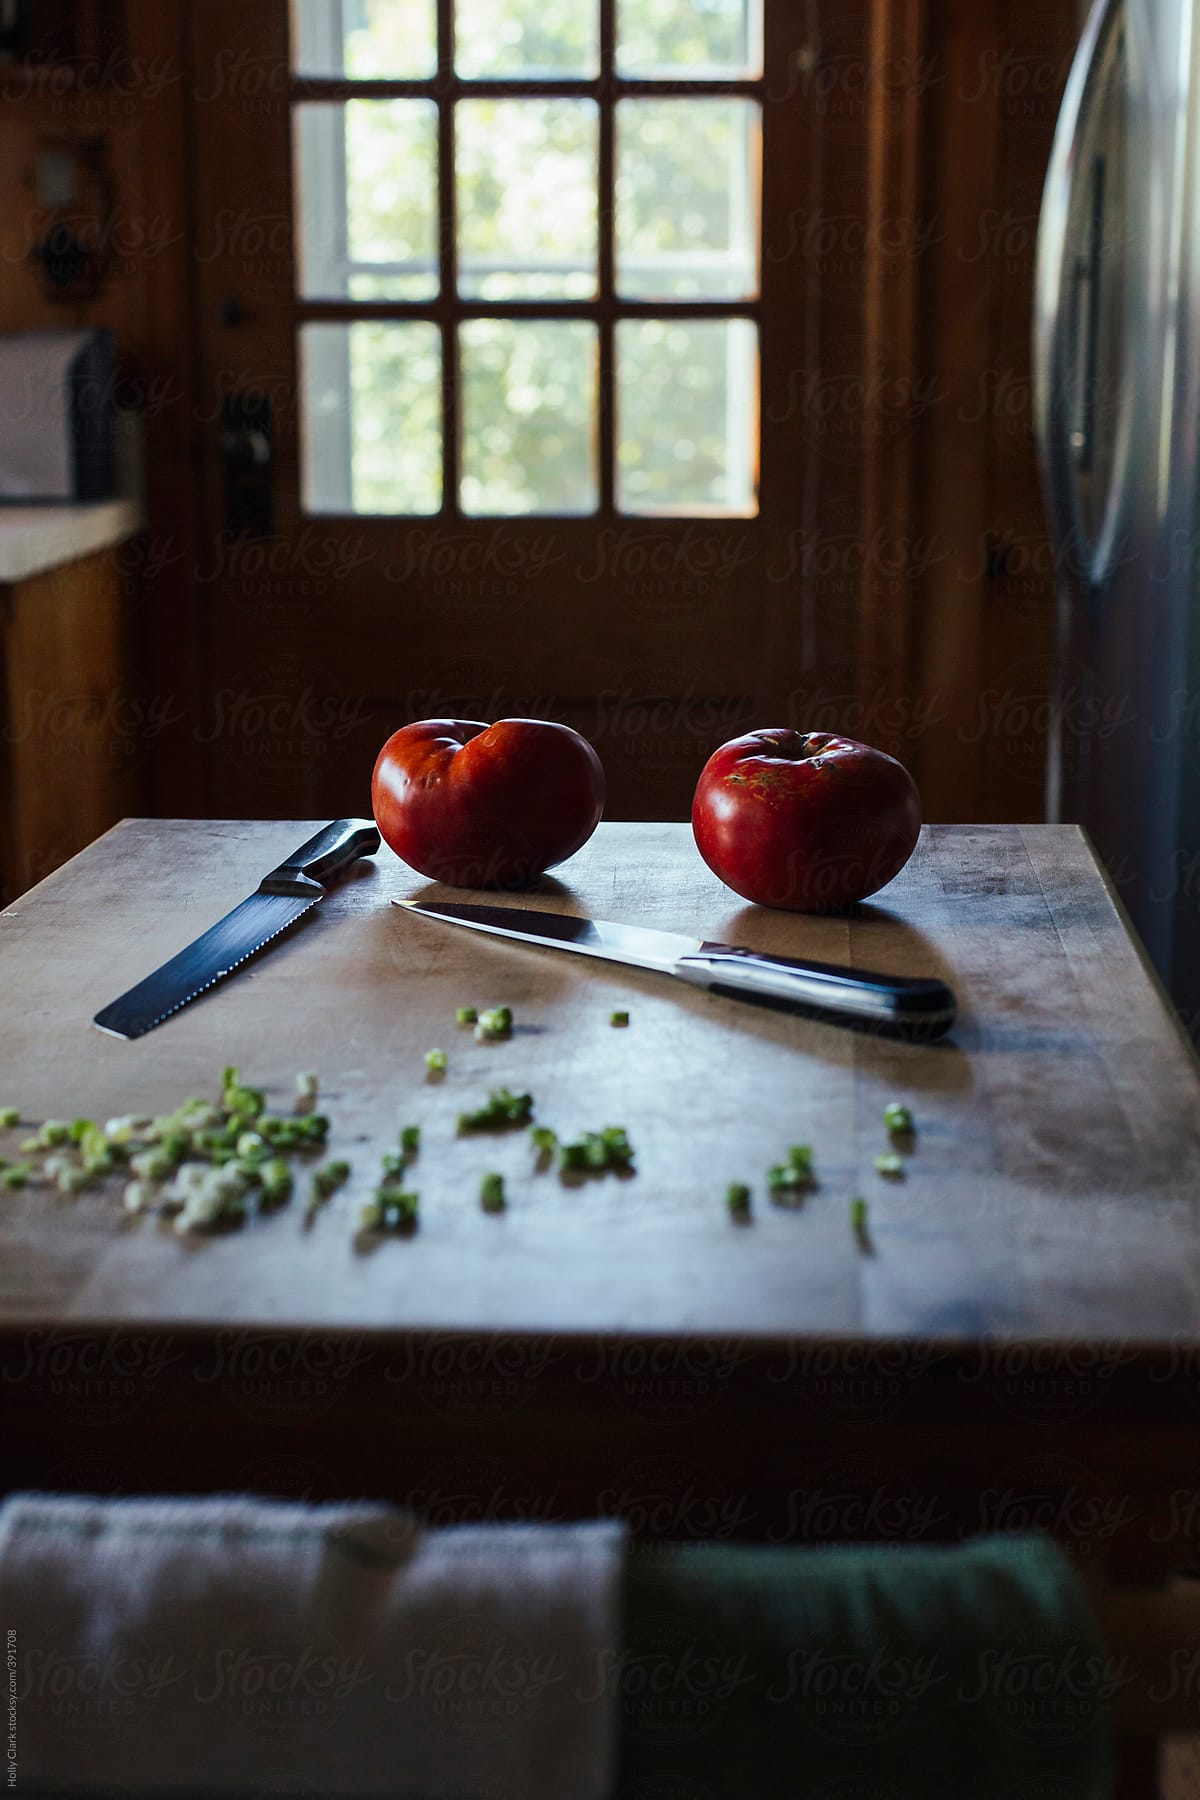 Homegrown tomatoes and chopped green onions on a butcher block